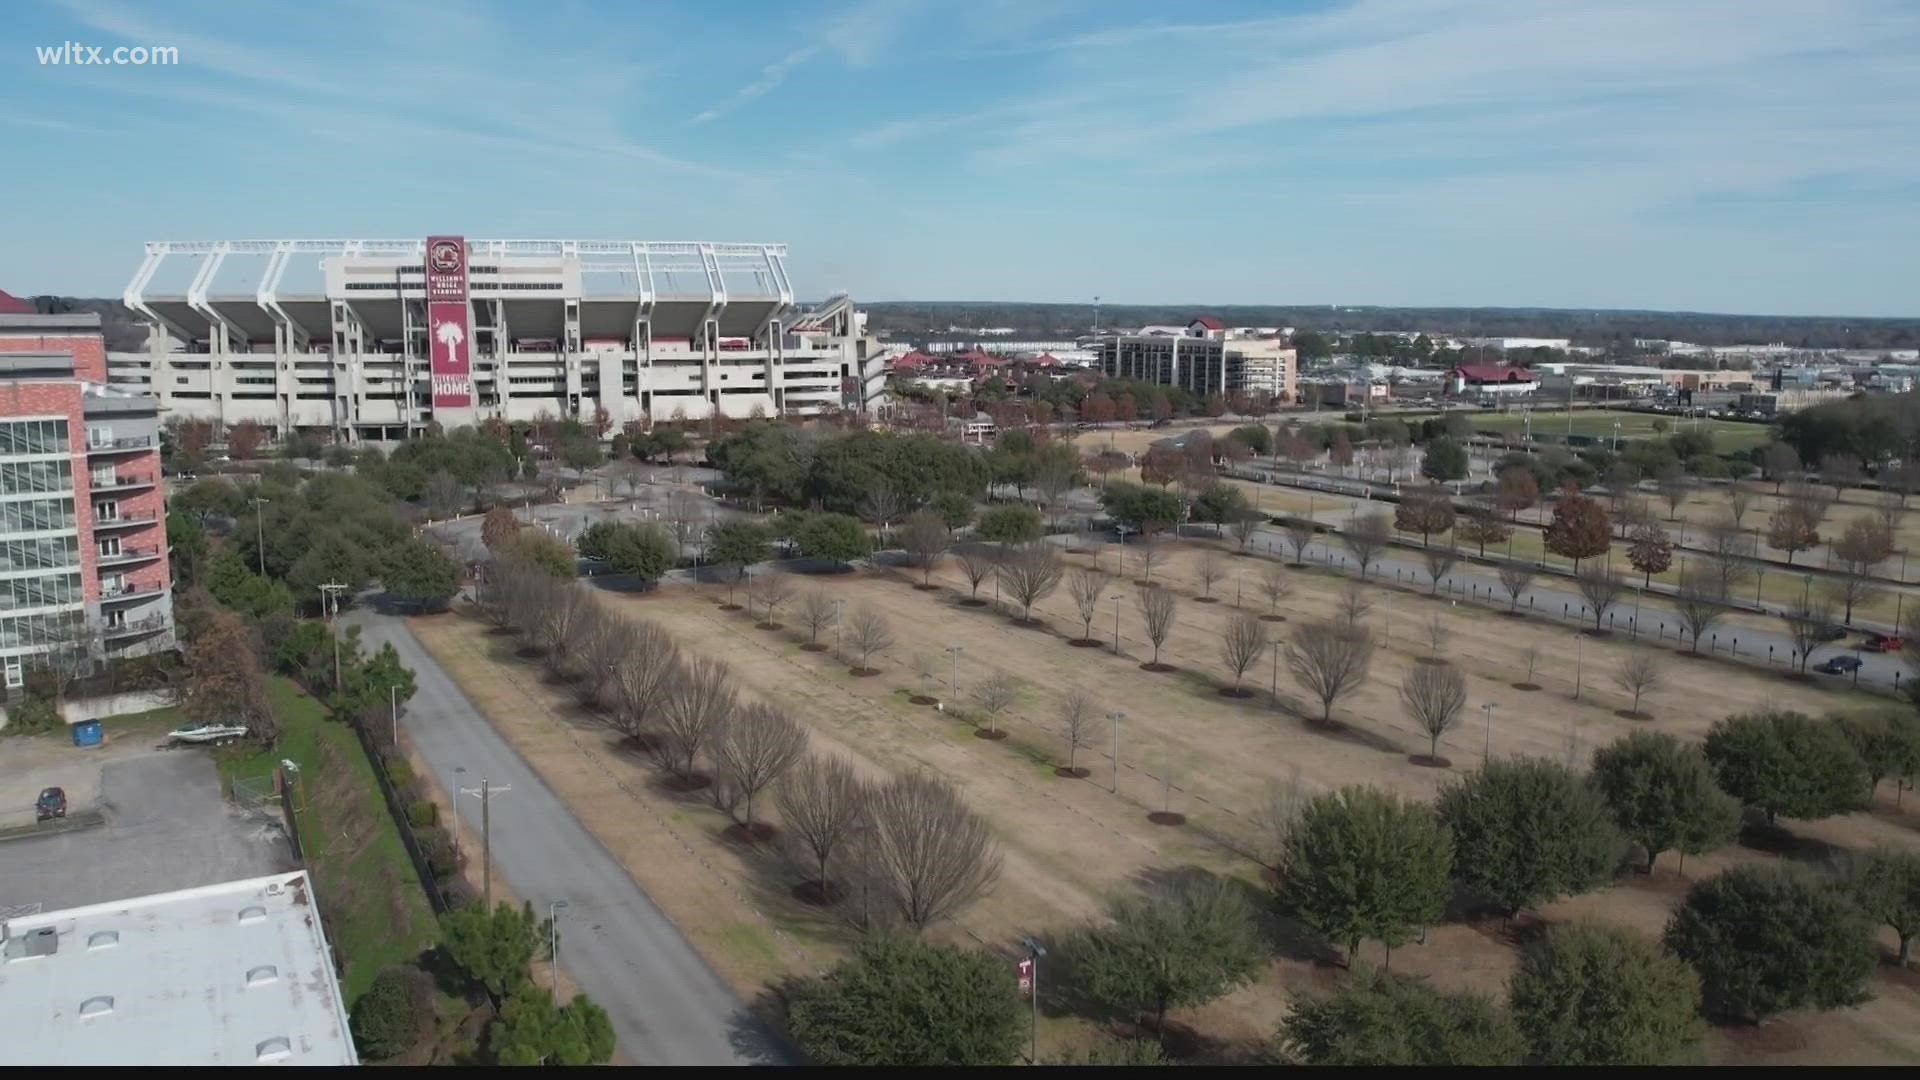 Officials are looking to develop the more than 800 acres of land surrounding Williams-Brice stadium.